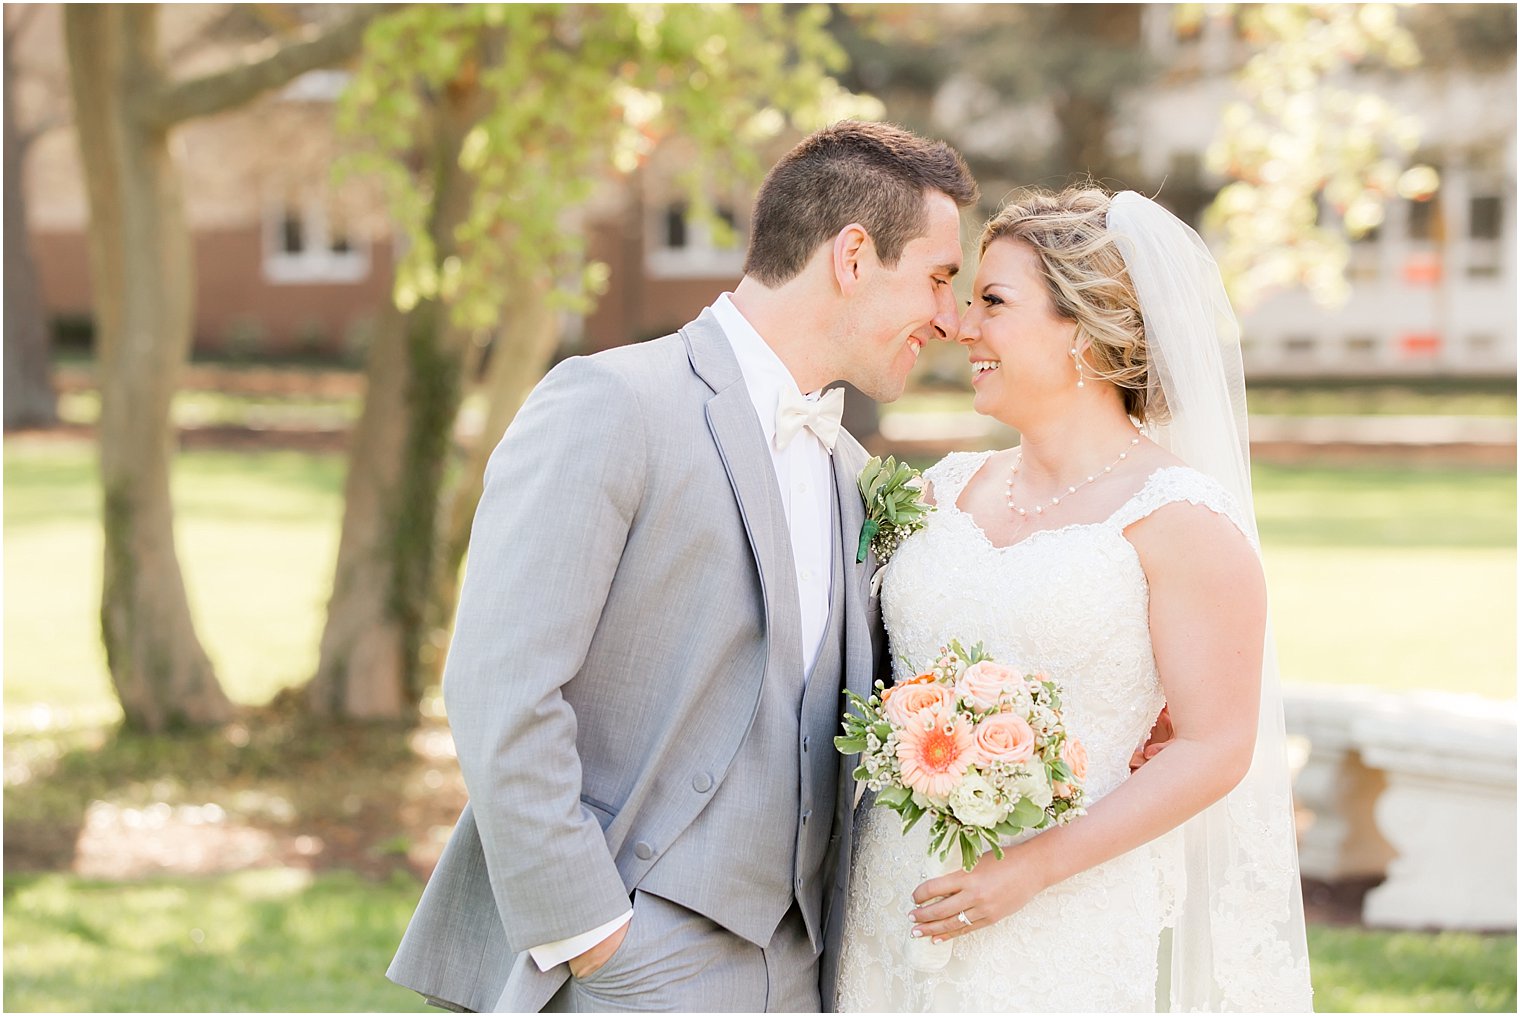 Cute bride and groom portrait at Monmouth University Library Gardens | Photo by Idalia Photography